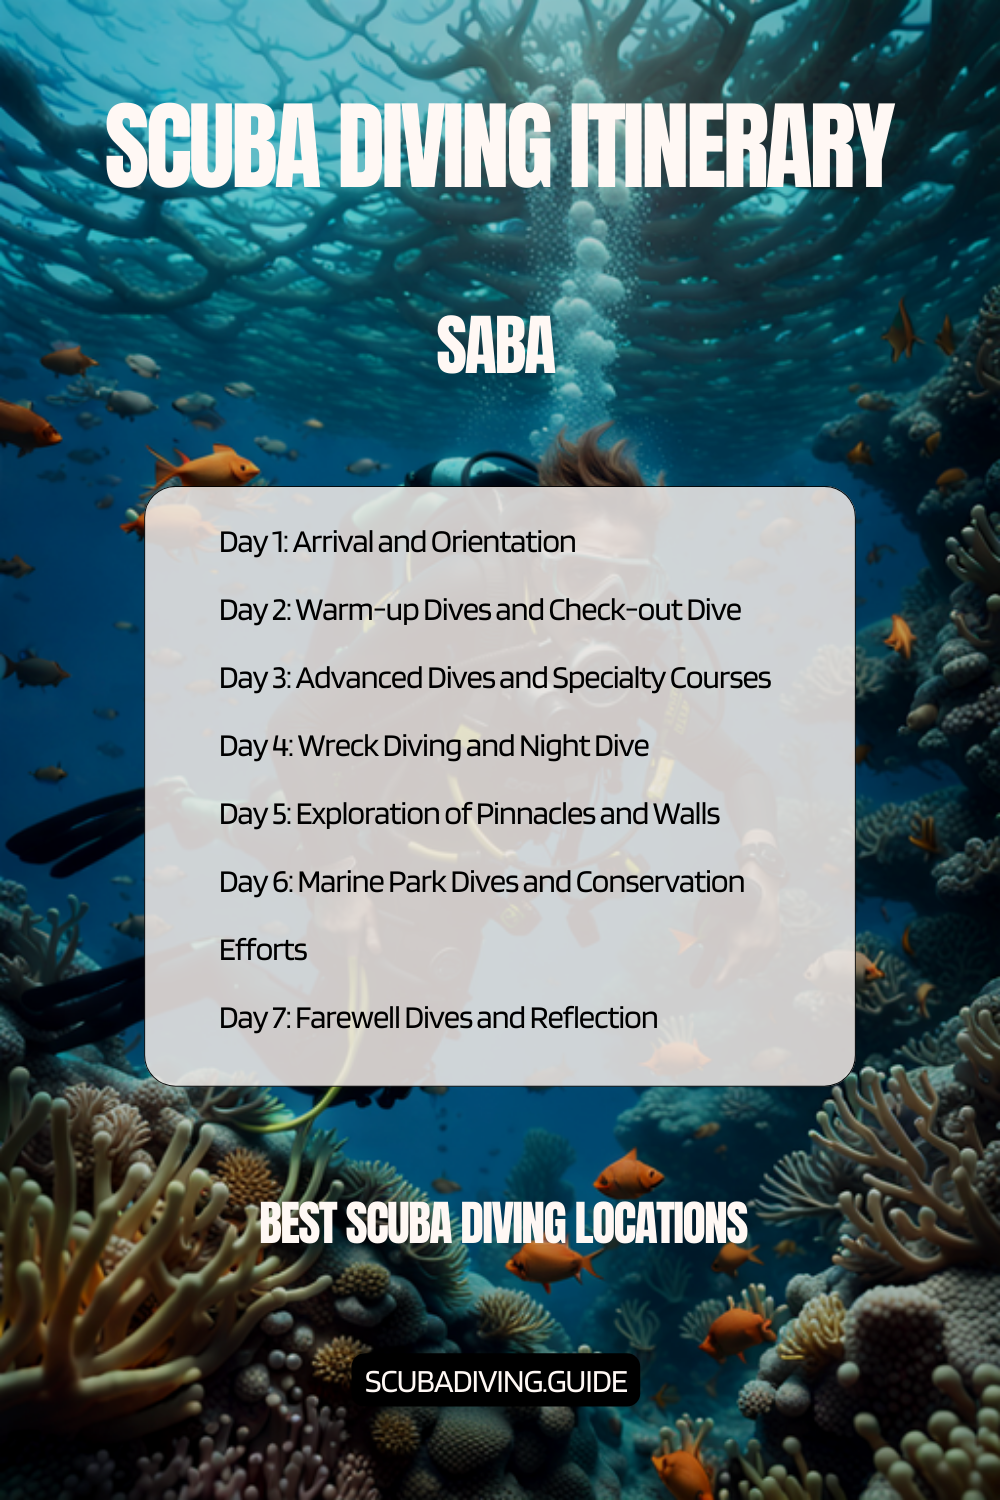 Saba Recommended Scuba Diving Itinerary